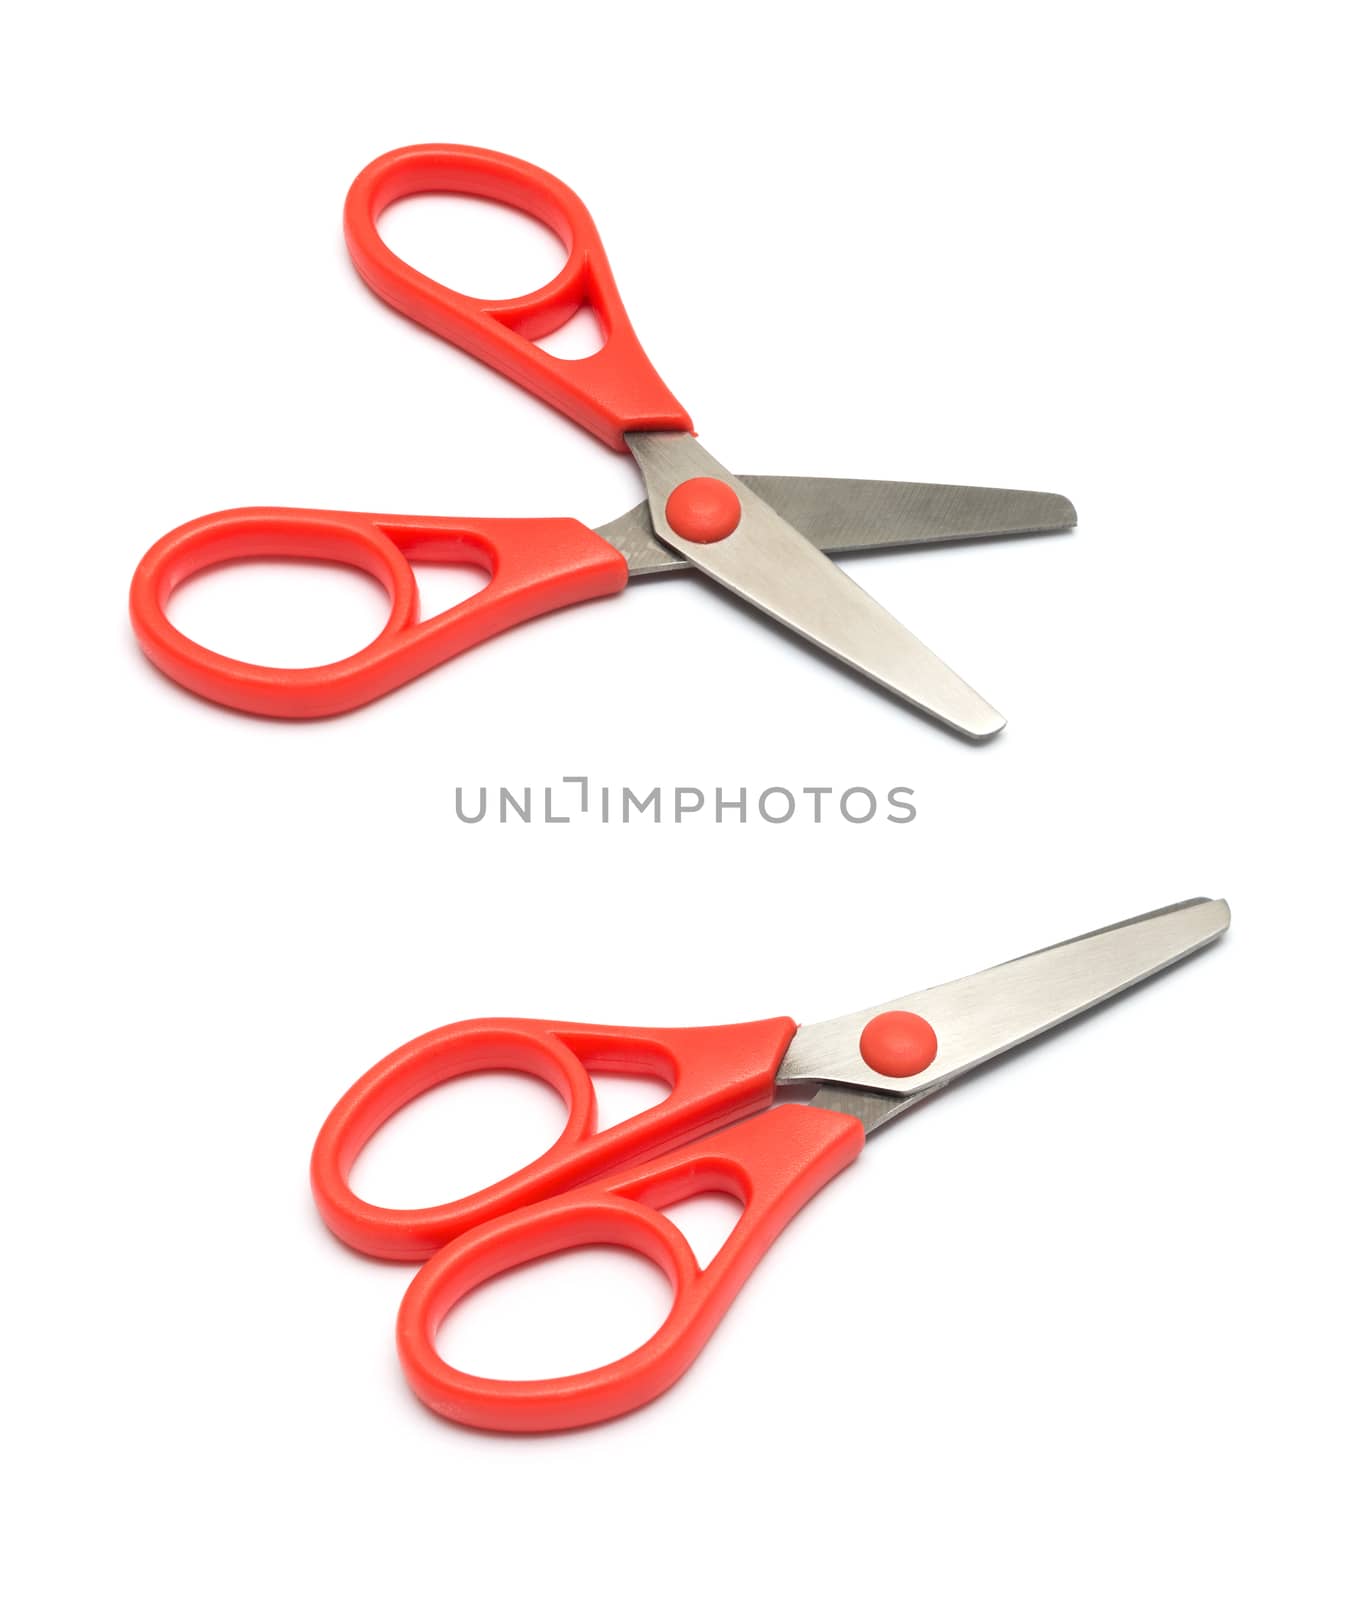 Red scissors. Object is isolated on white background